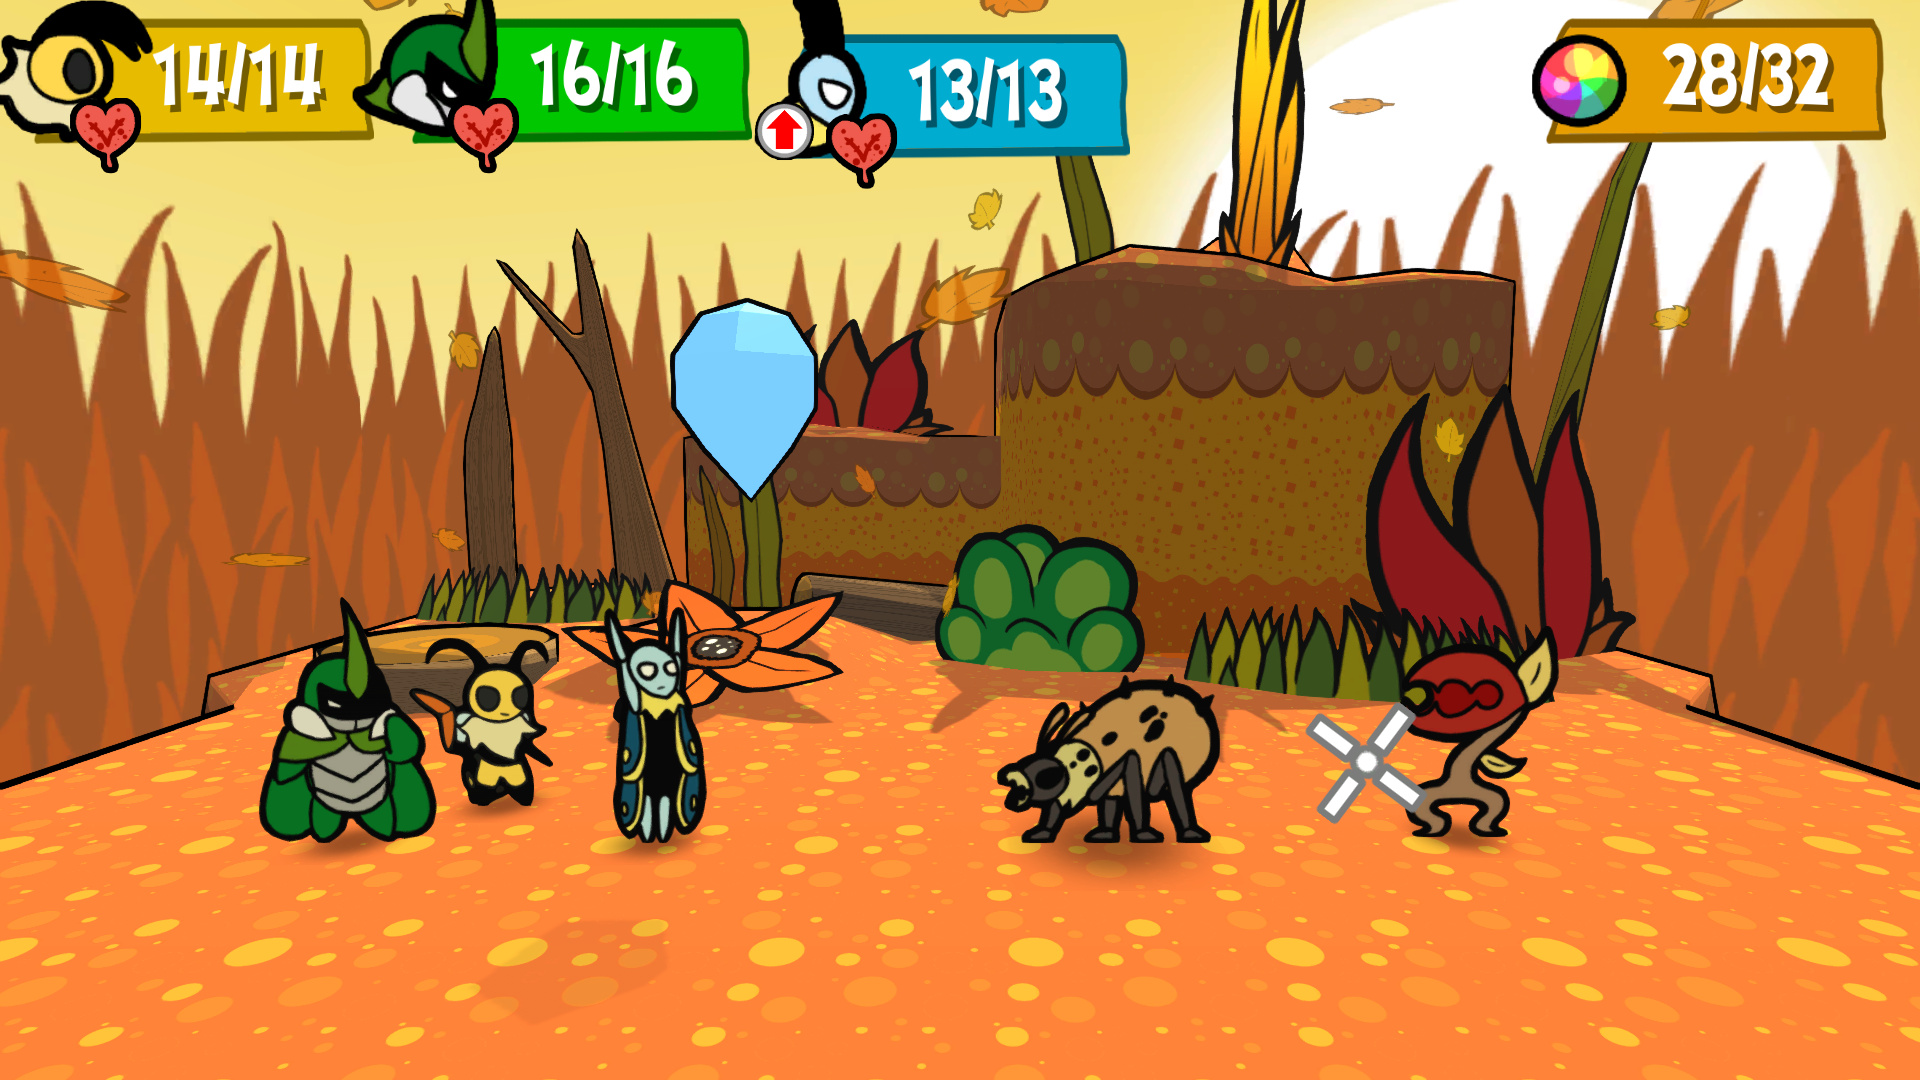 The Paper Mario Lookalike Bug Fables Launches On Switch At The End Of